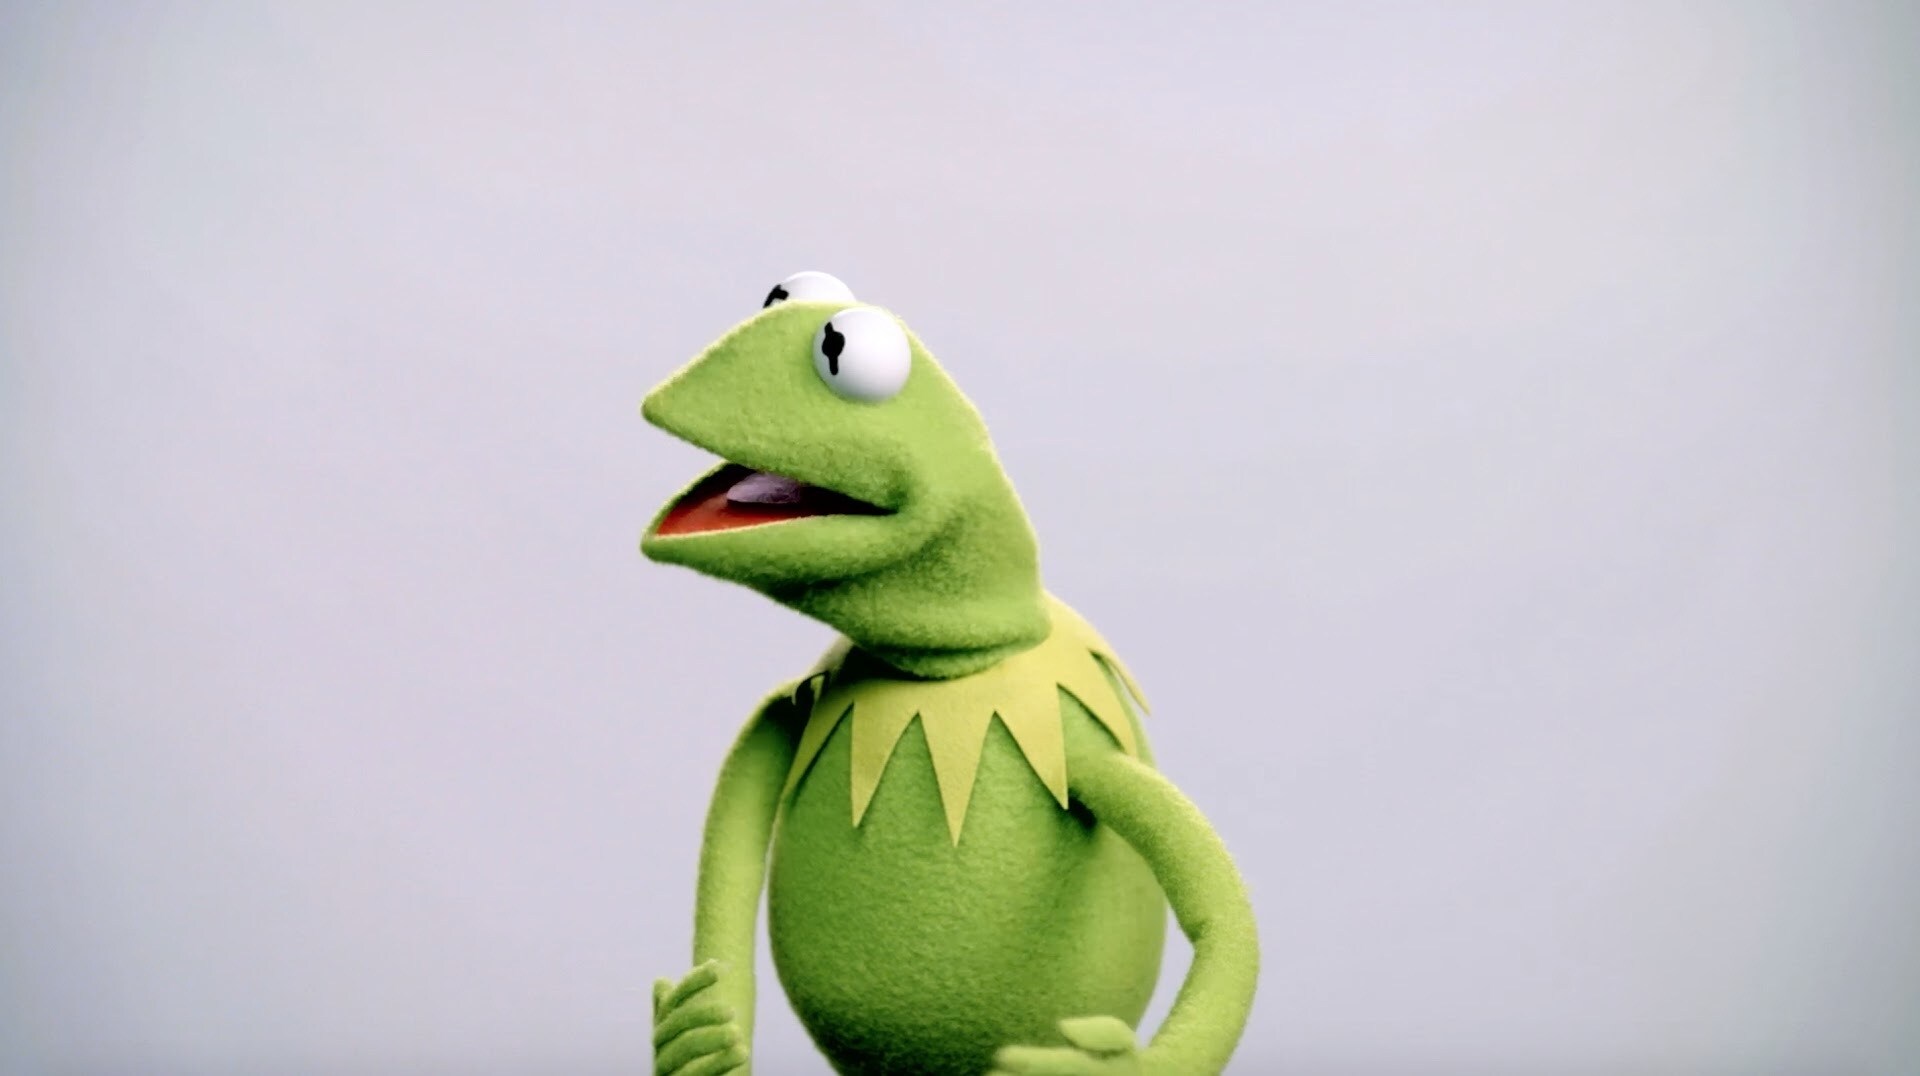 Mower Wisdom from Kermit the Frog | Muppet Thought of the Week by The Muppets